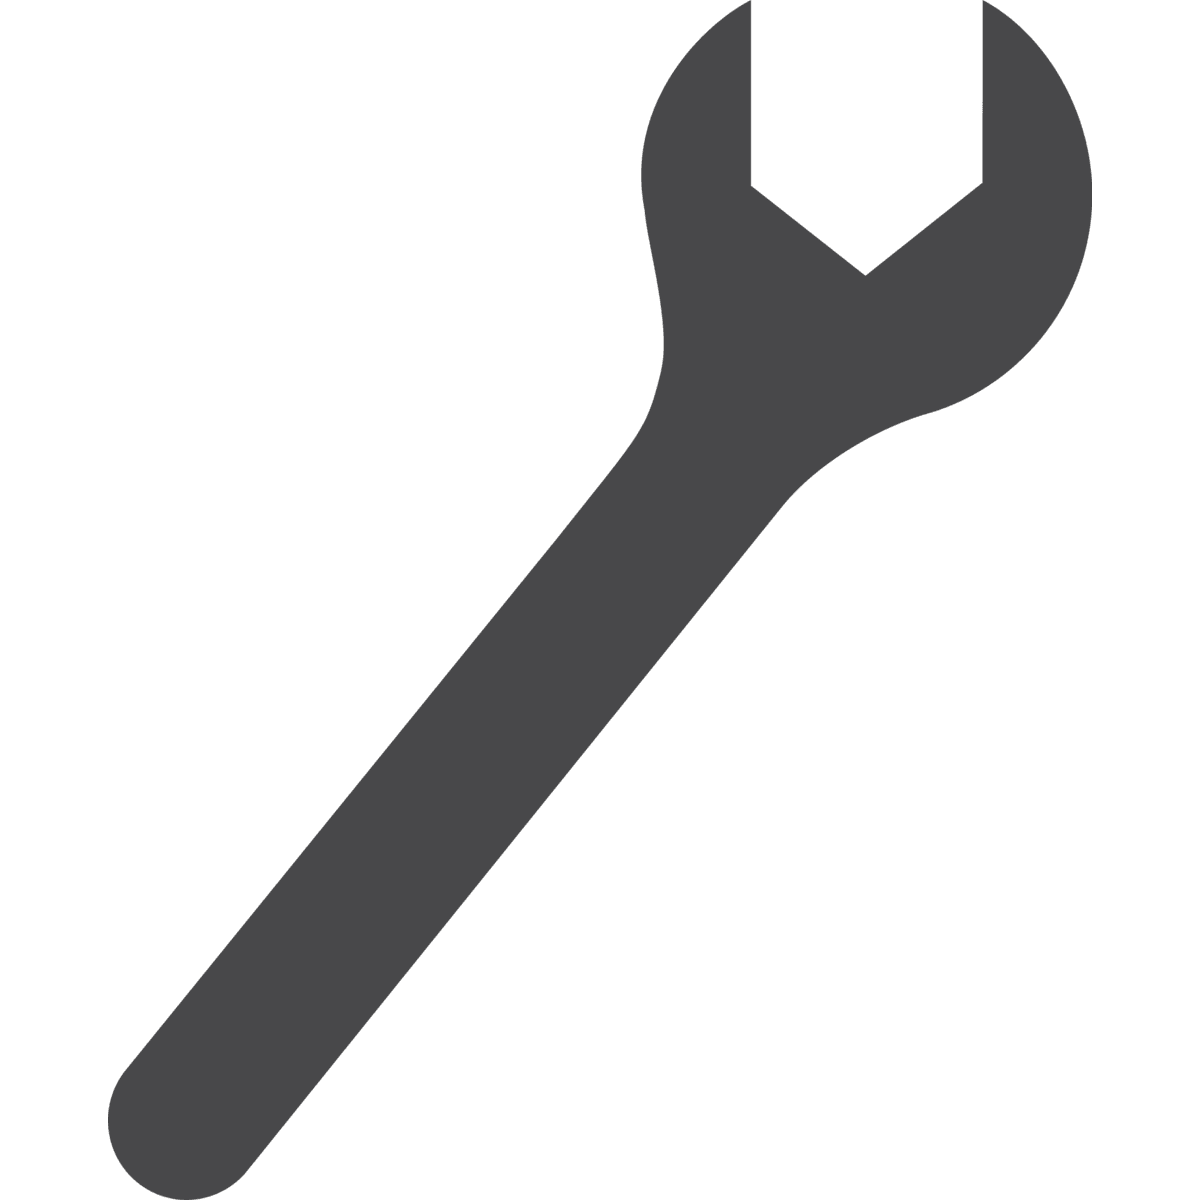 Pipe silhouette at getdrawings. Hands clipart wrench